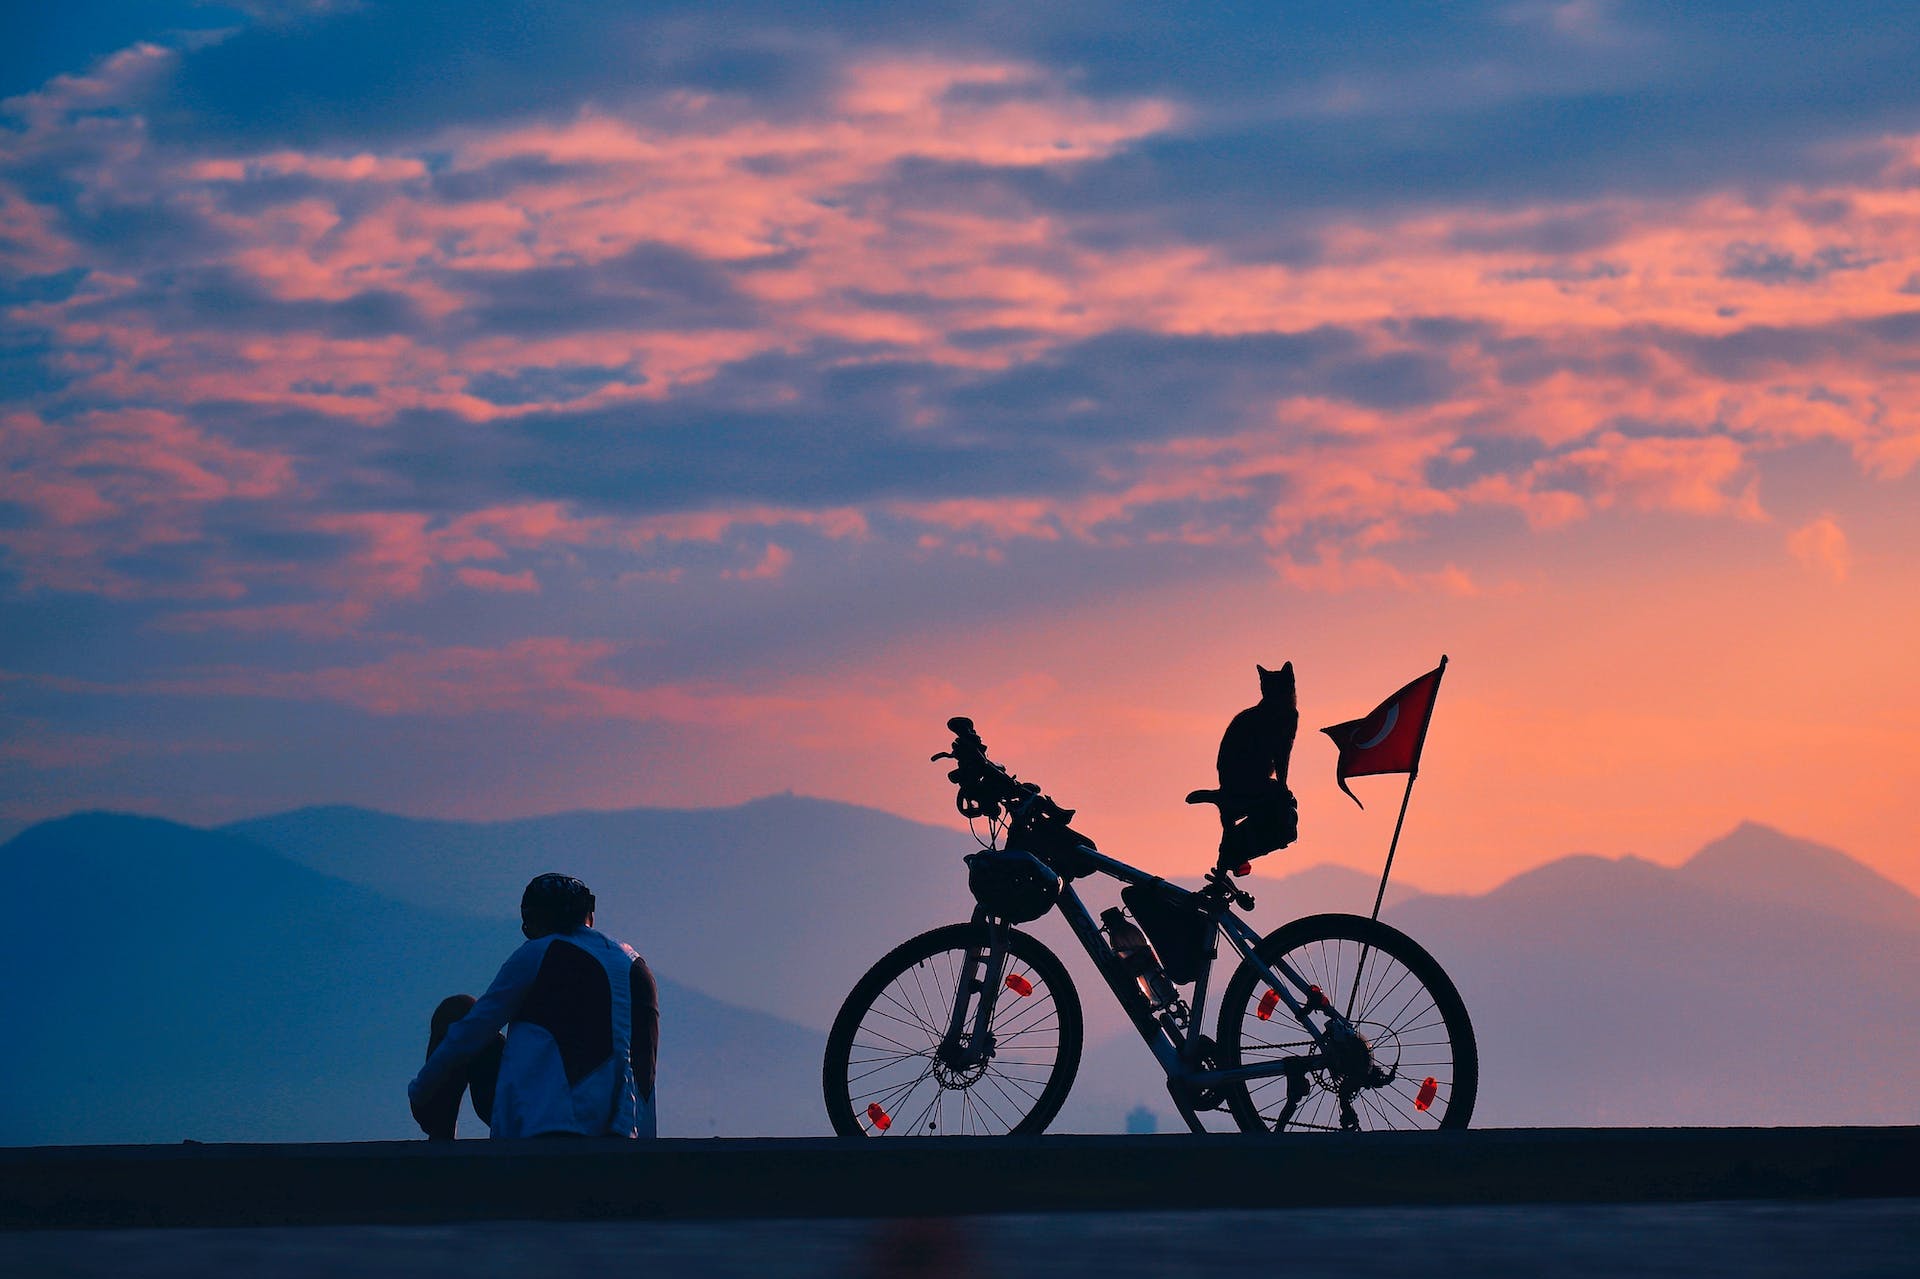 A cat sitting on a bicycle with their parent overlooking a mountain range